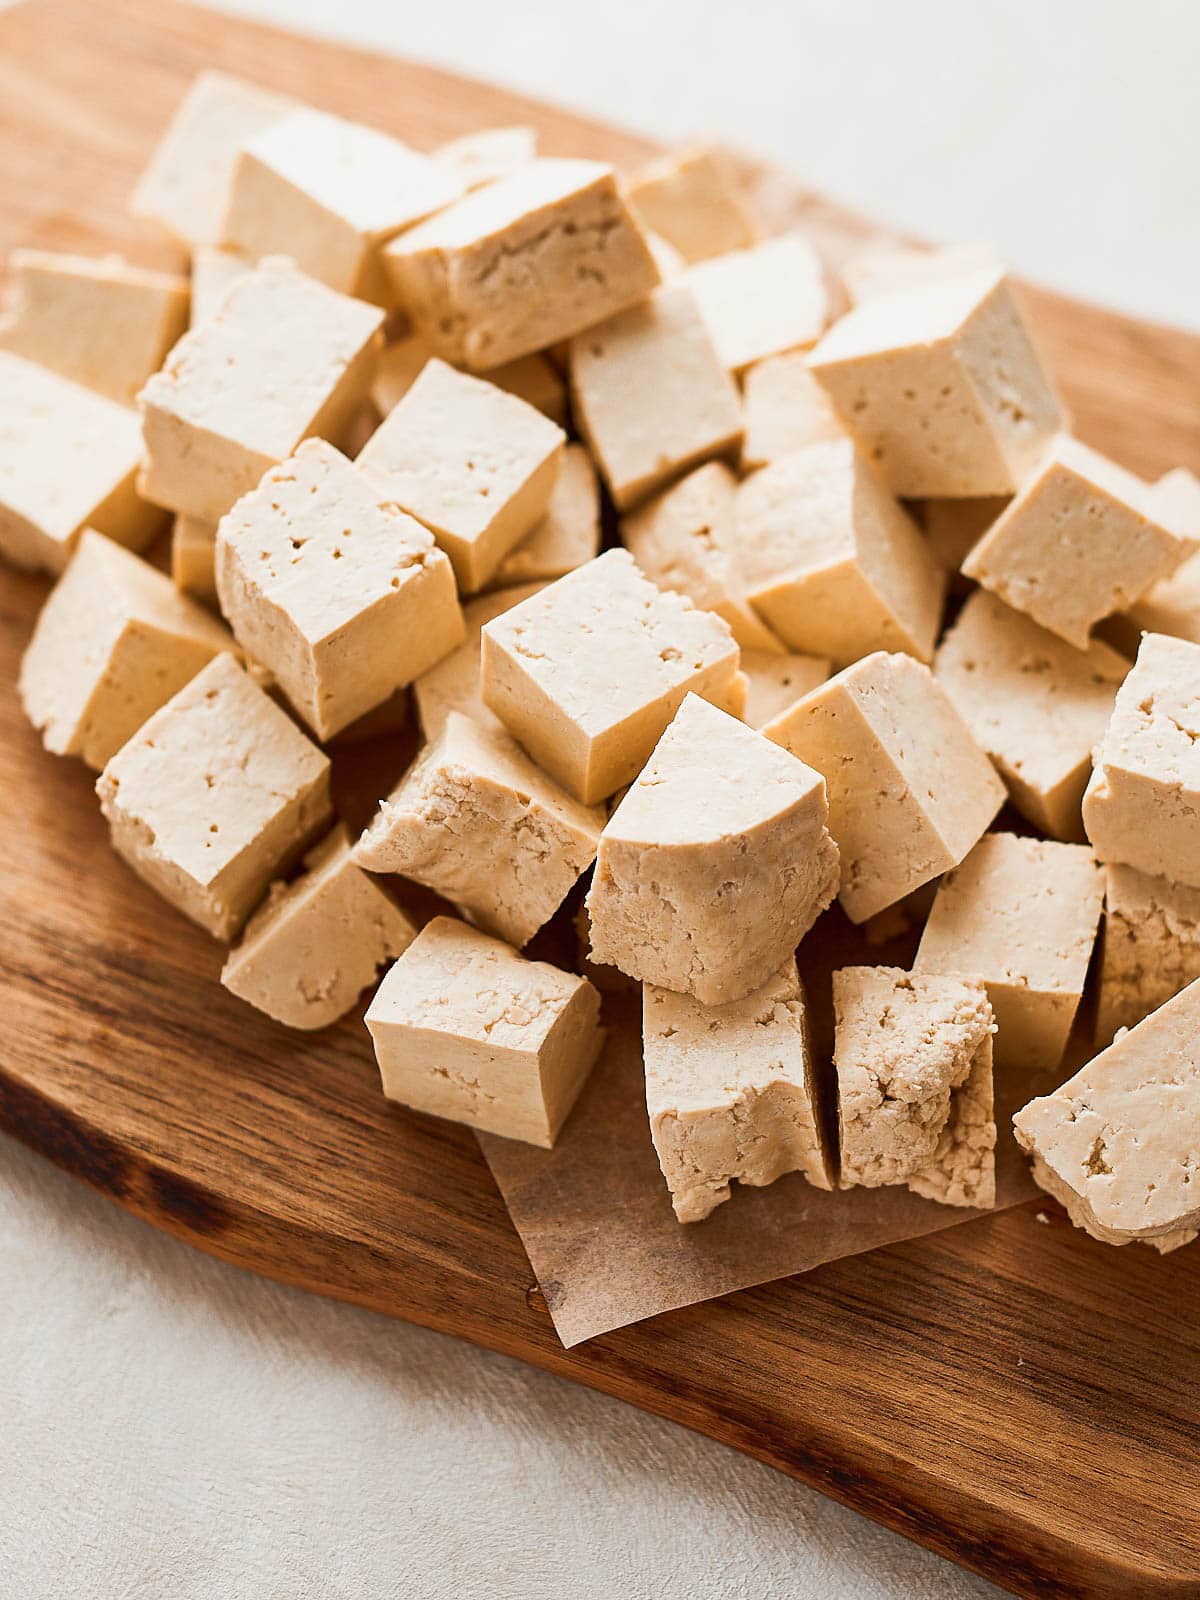 Tofu chopped into cubes on a chopping board